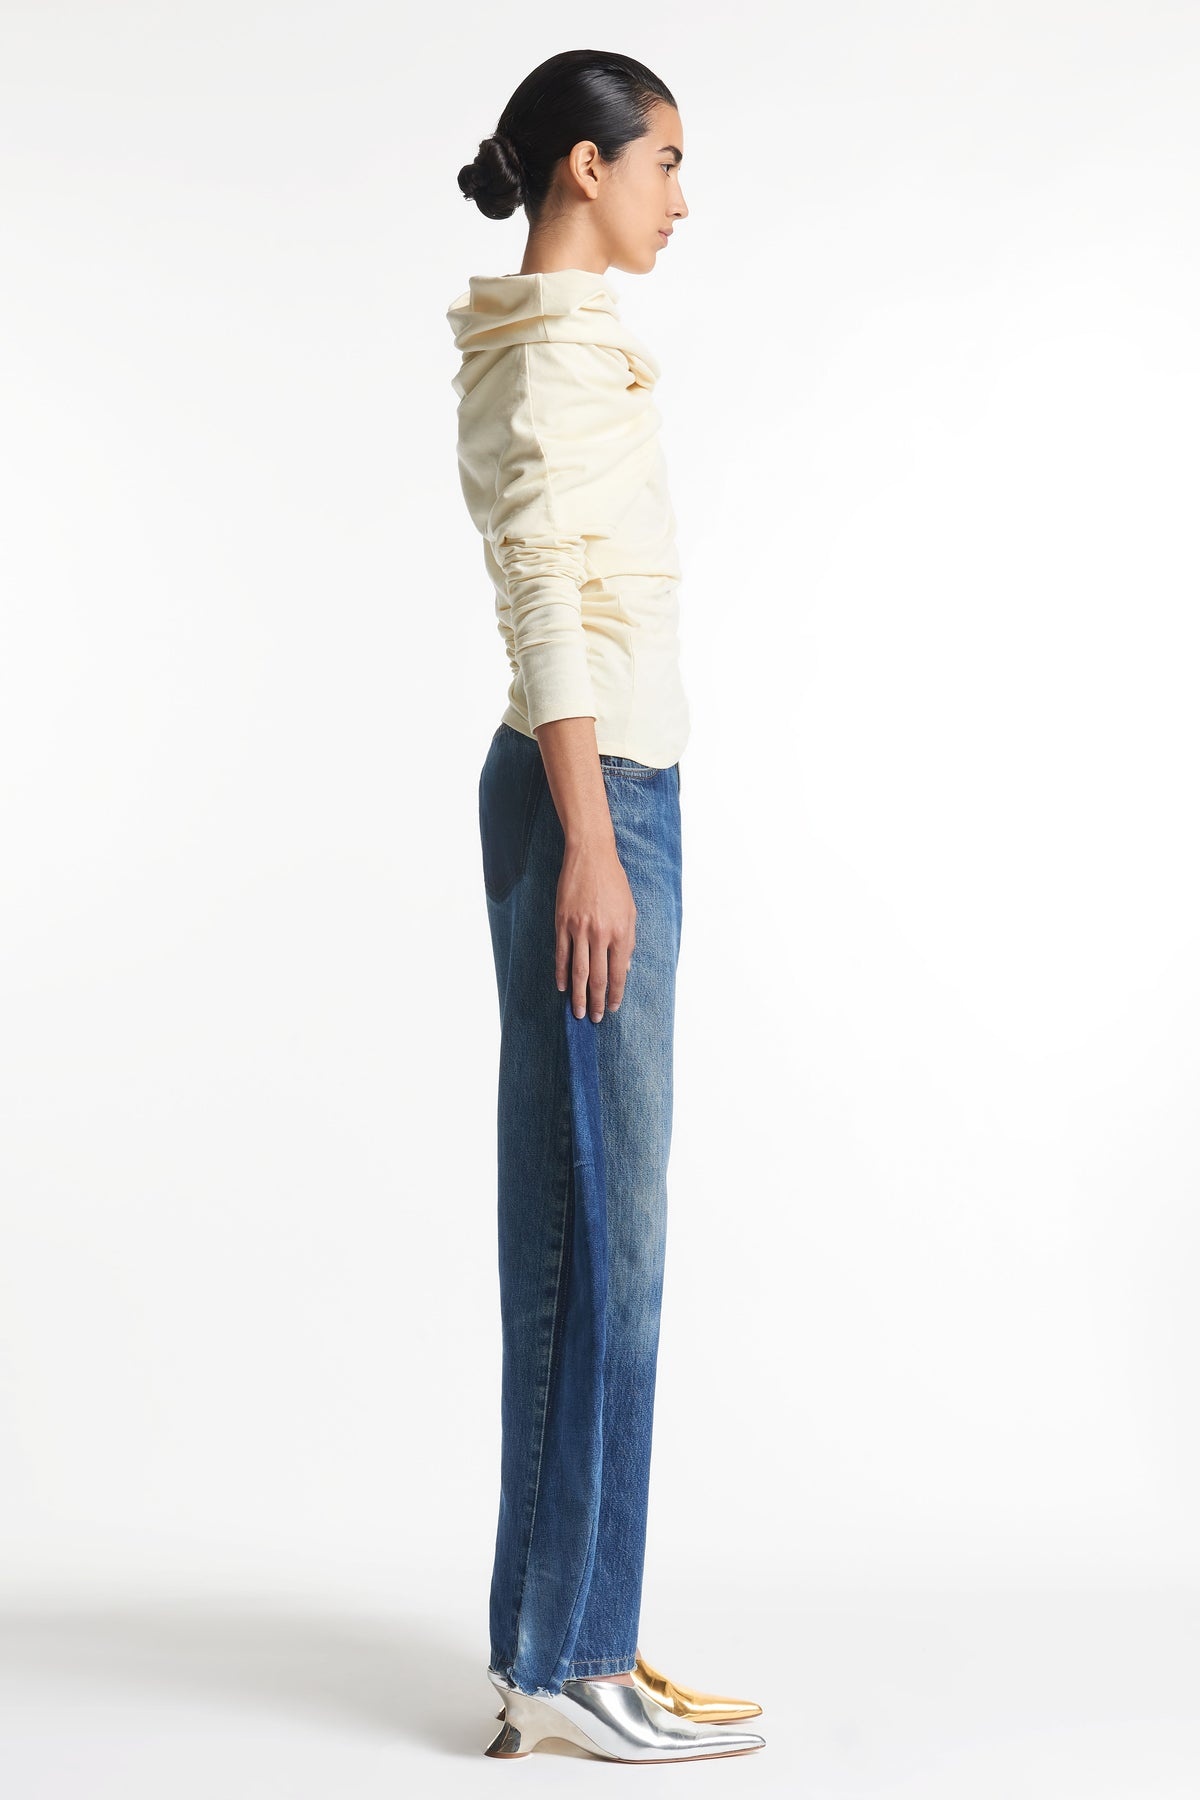 JERSEY COWL NECK TOP IVORY - 3